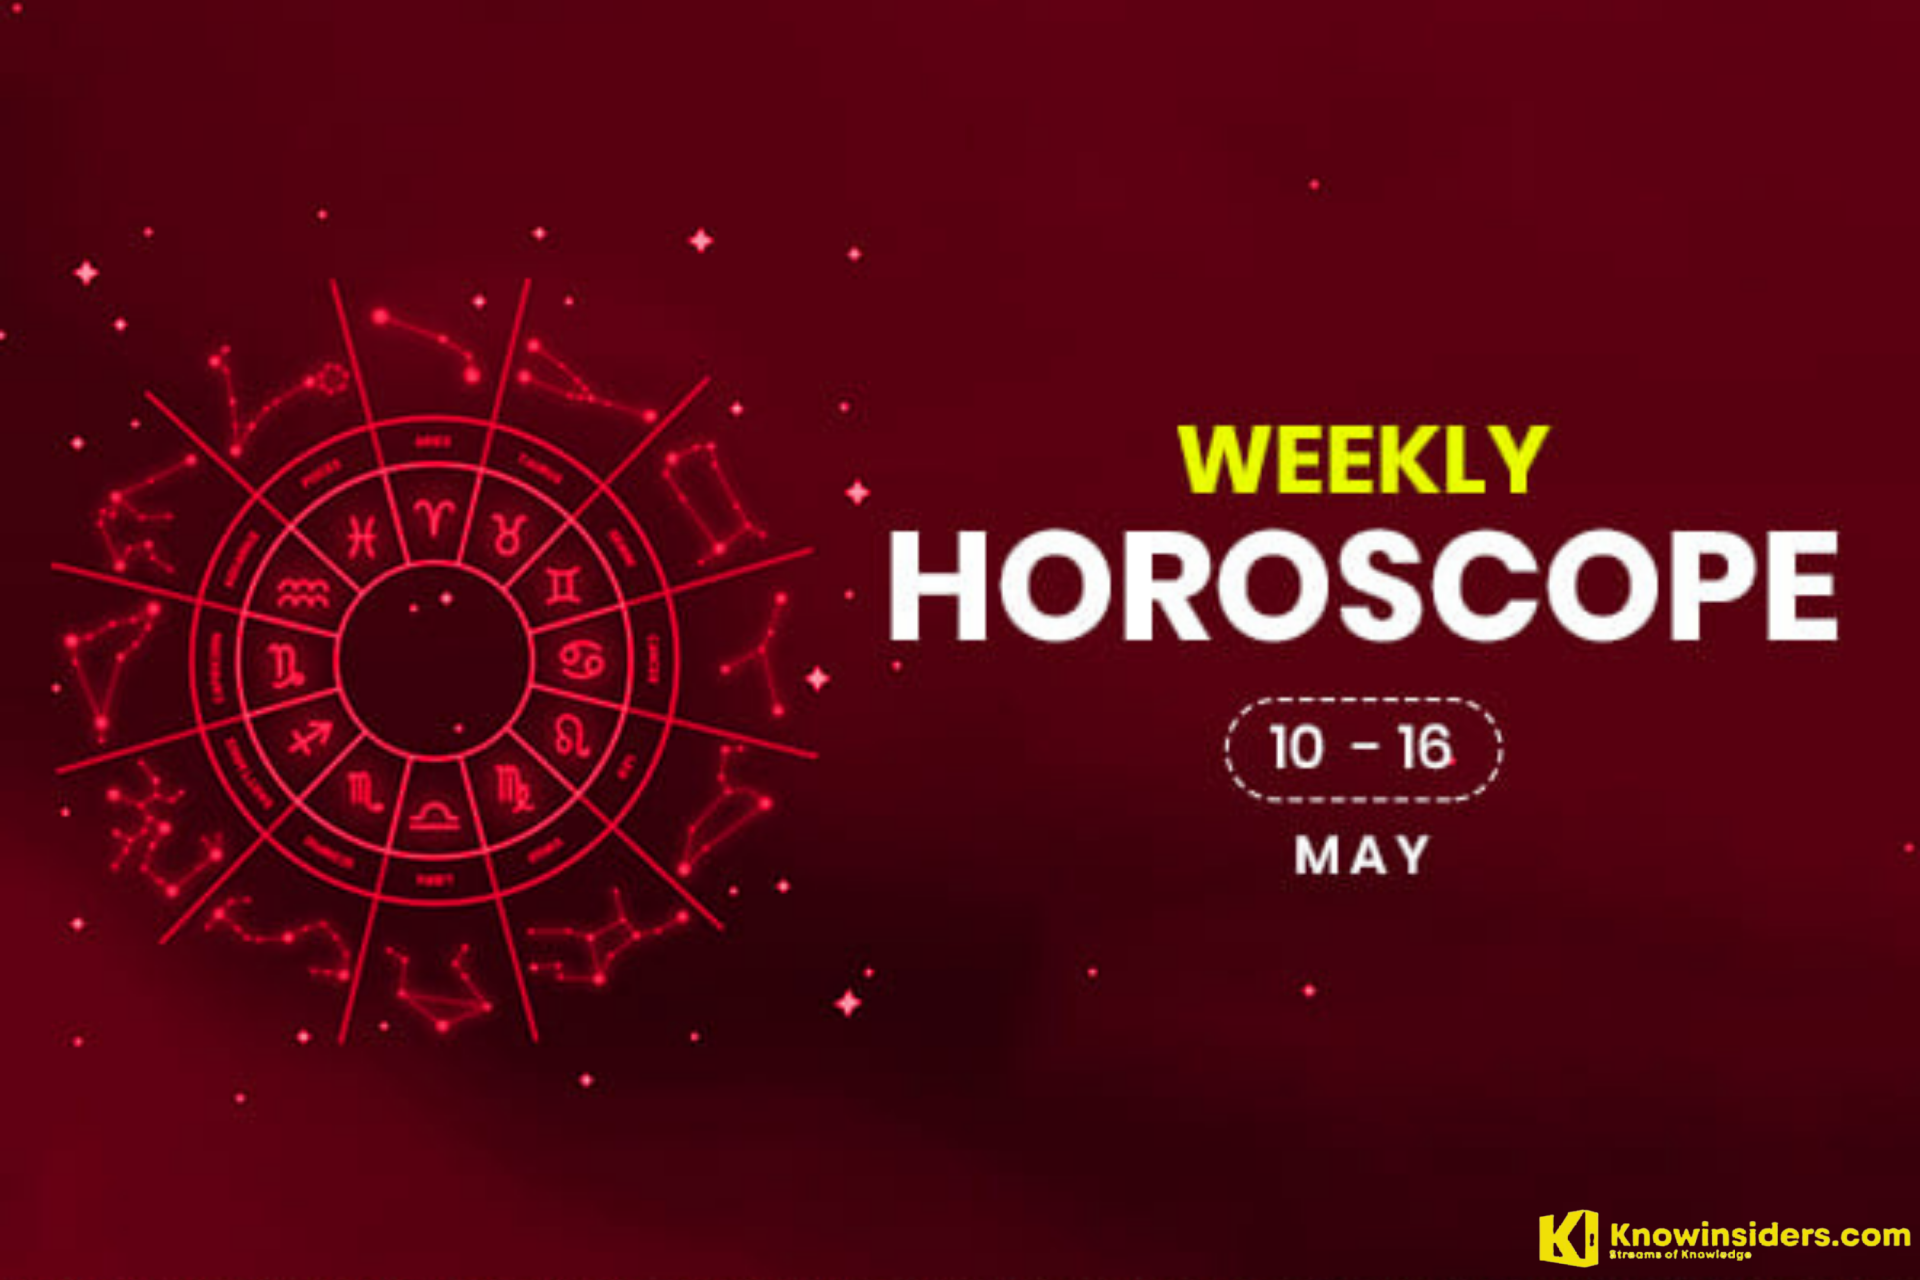 Cancer Weekly Horoscope (May 10 - May 16): Predictions for Love, Financial, Career and Health